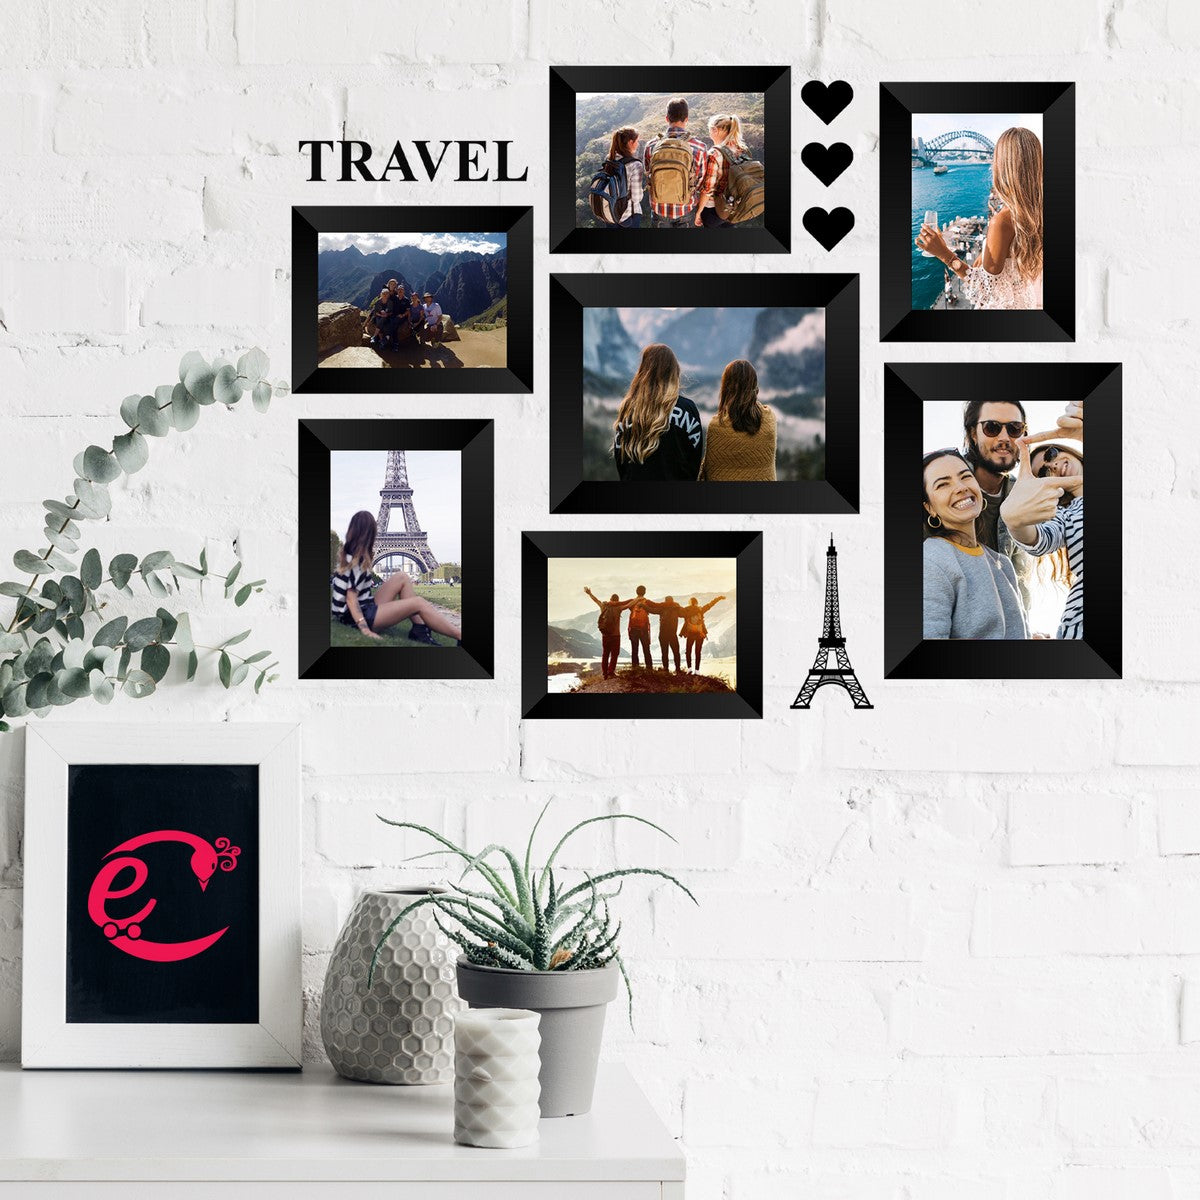 Memory Wall Collage Photo Frame - Set of 7 Photo Frames for 5 Photos of 4"x6", 2 Photos of 5"x7", 1 Piece of TRAVEL, 1 Piece of EIFFEL TOWER, 3 Pieces of HEARTS 1